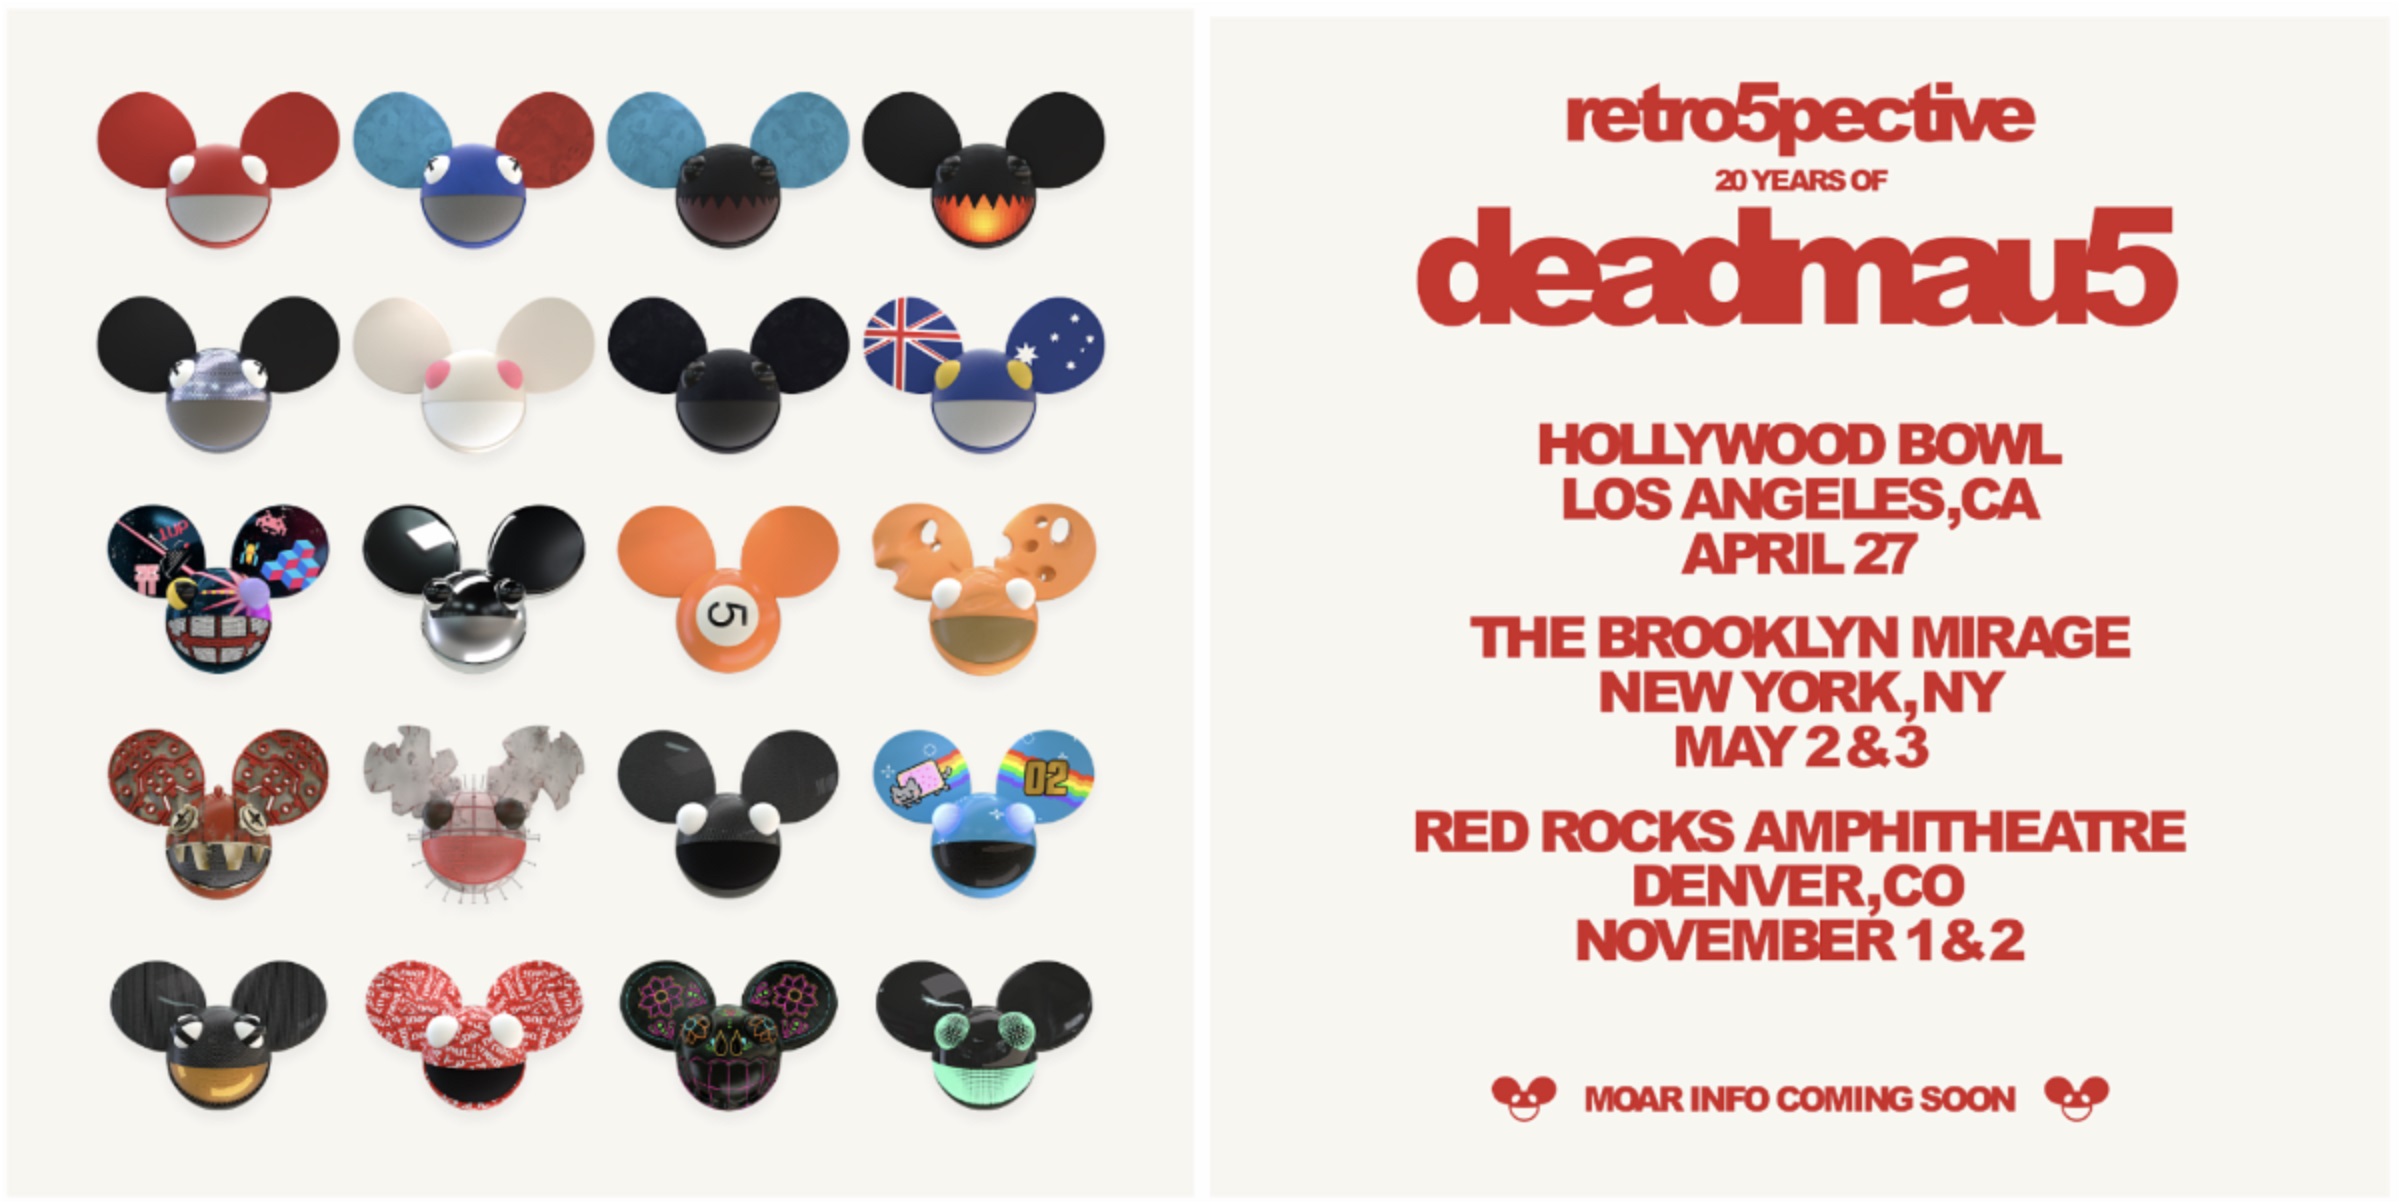 Announcing 'retro5pective: 20 Years Of deadmau5' Shows -- April 27 The Hollywood Bowl, May 2 + 3 The Brooklyn Mirage, Nov 1 + 2 Red Rocks Amphitheatre